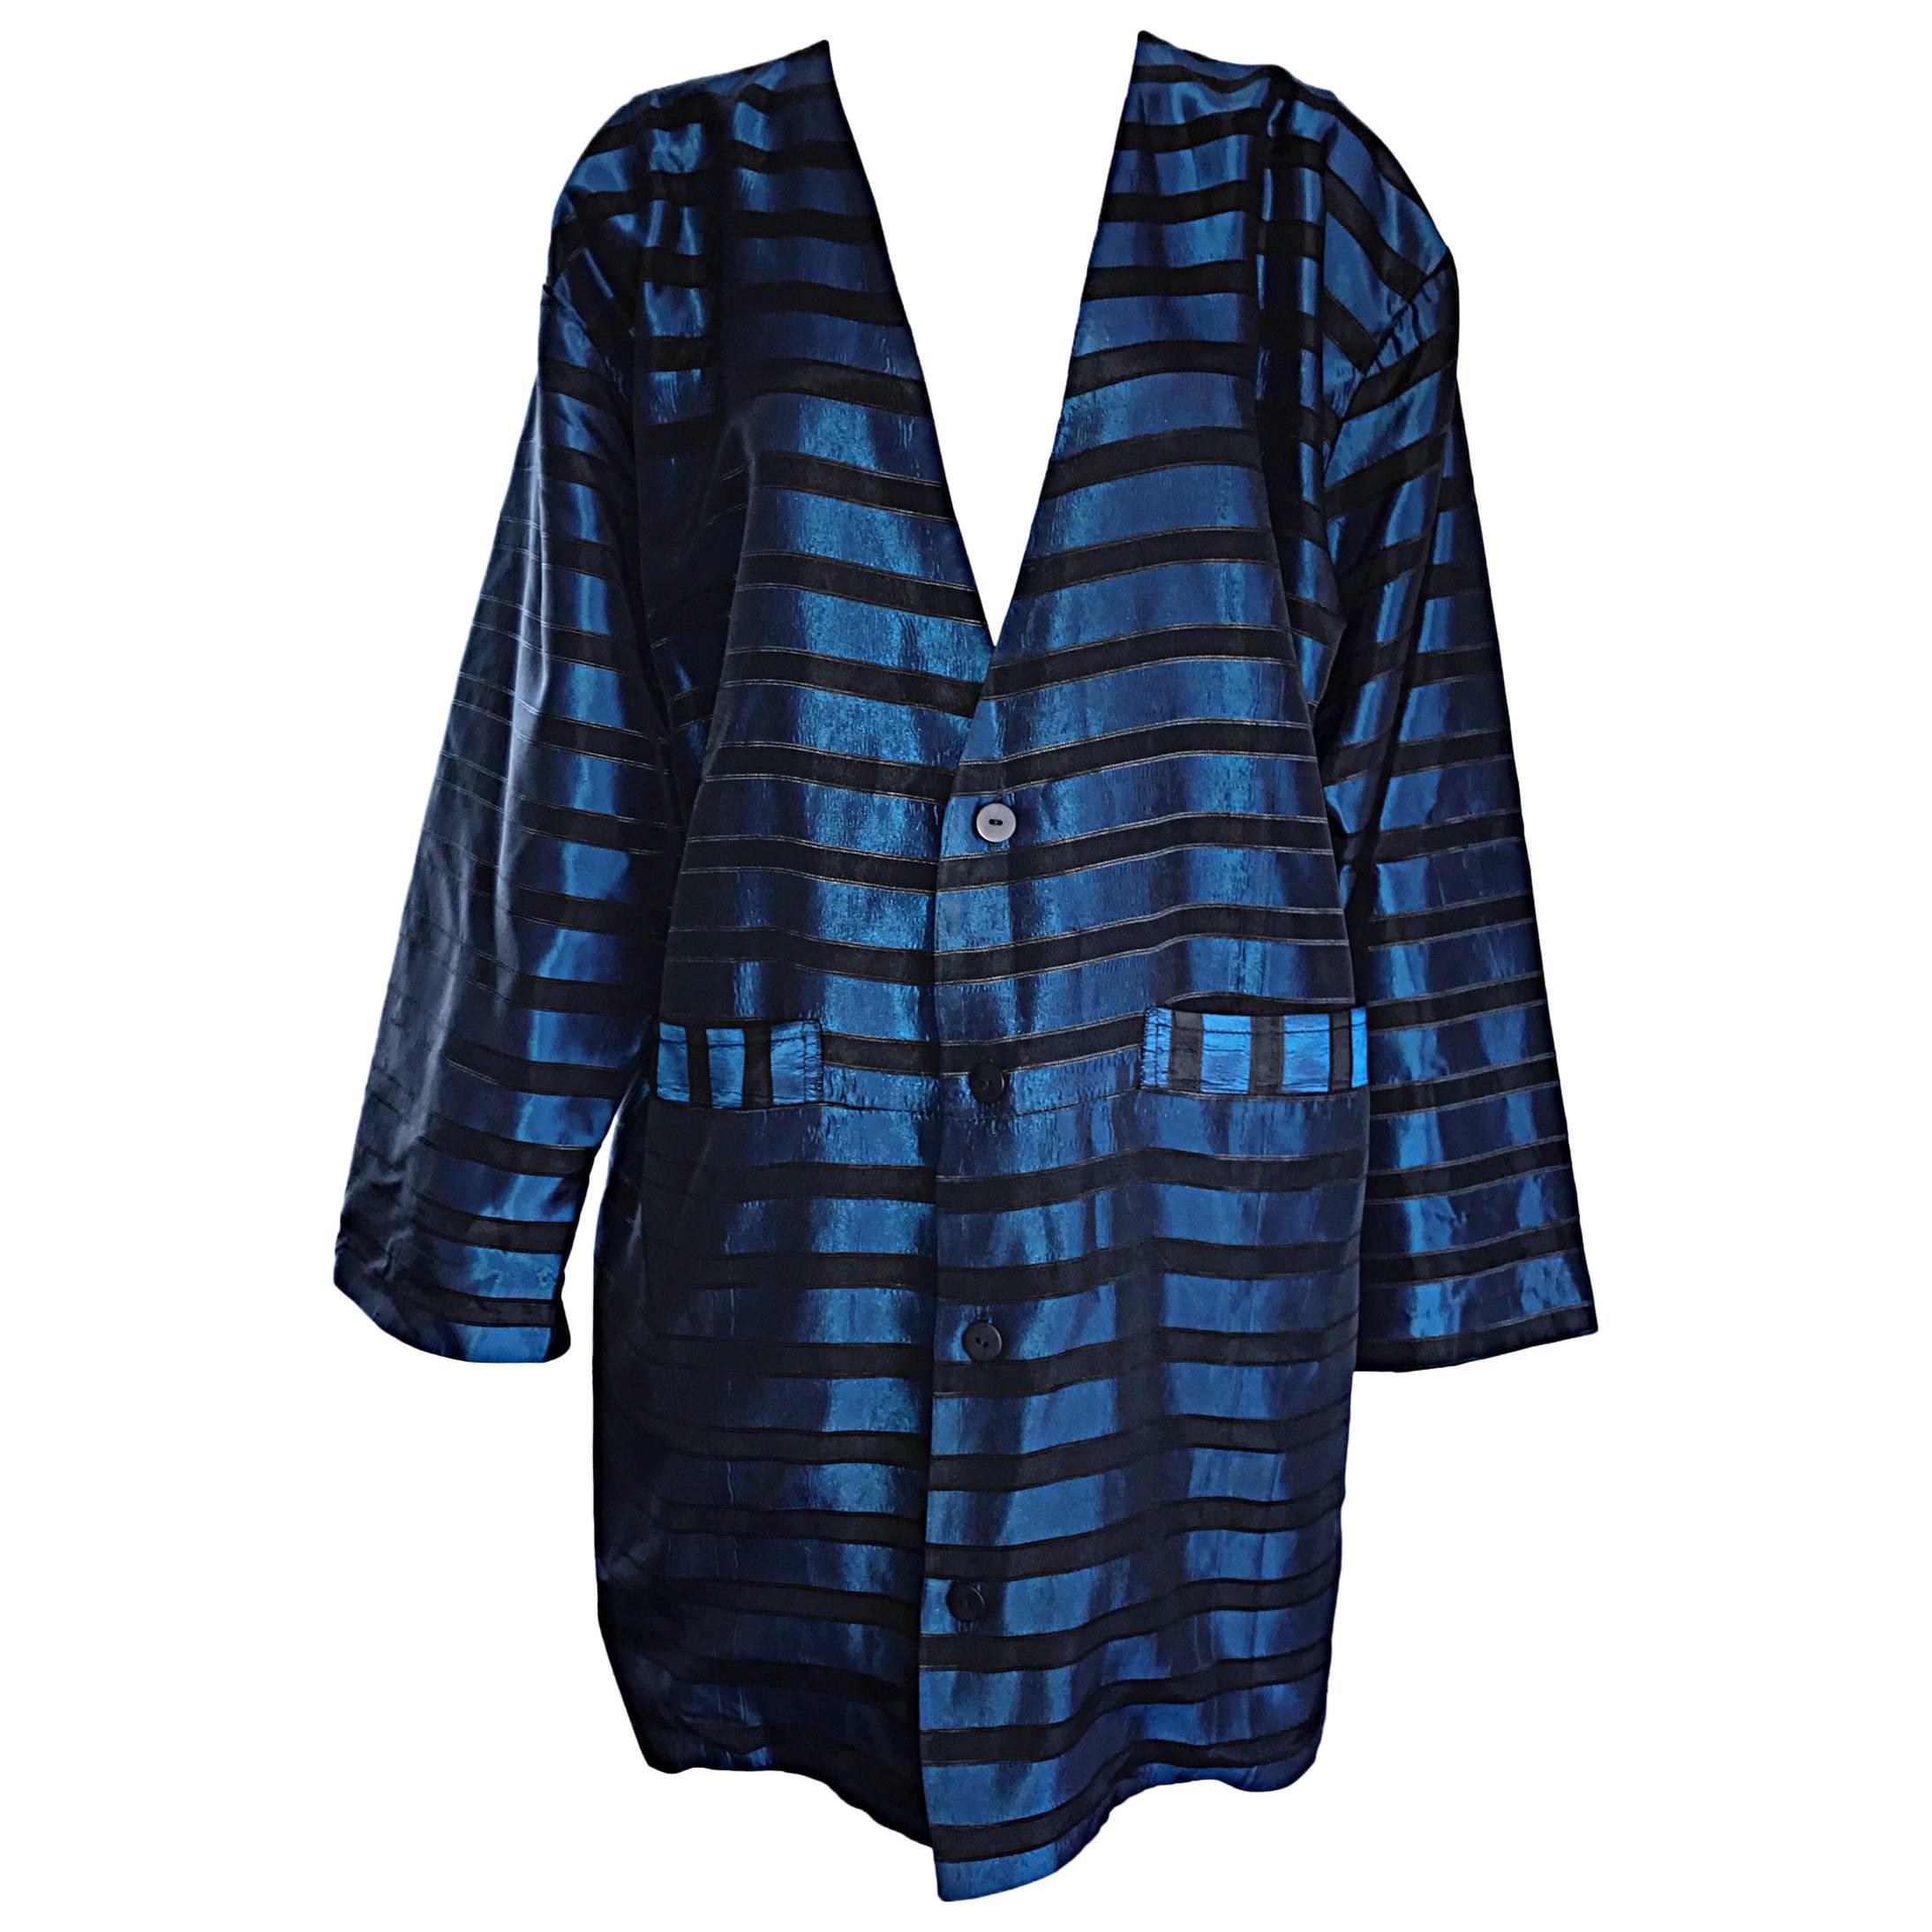 Rare Vintage Todd Oldham 1990s Blue and Black Striped Silk Cocoon Cocoon Jacket 